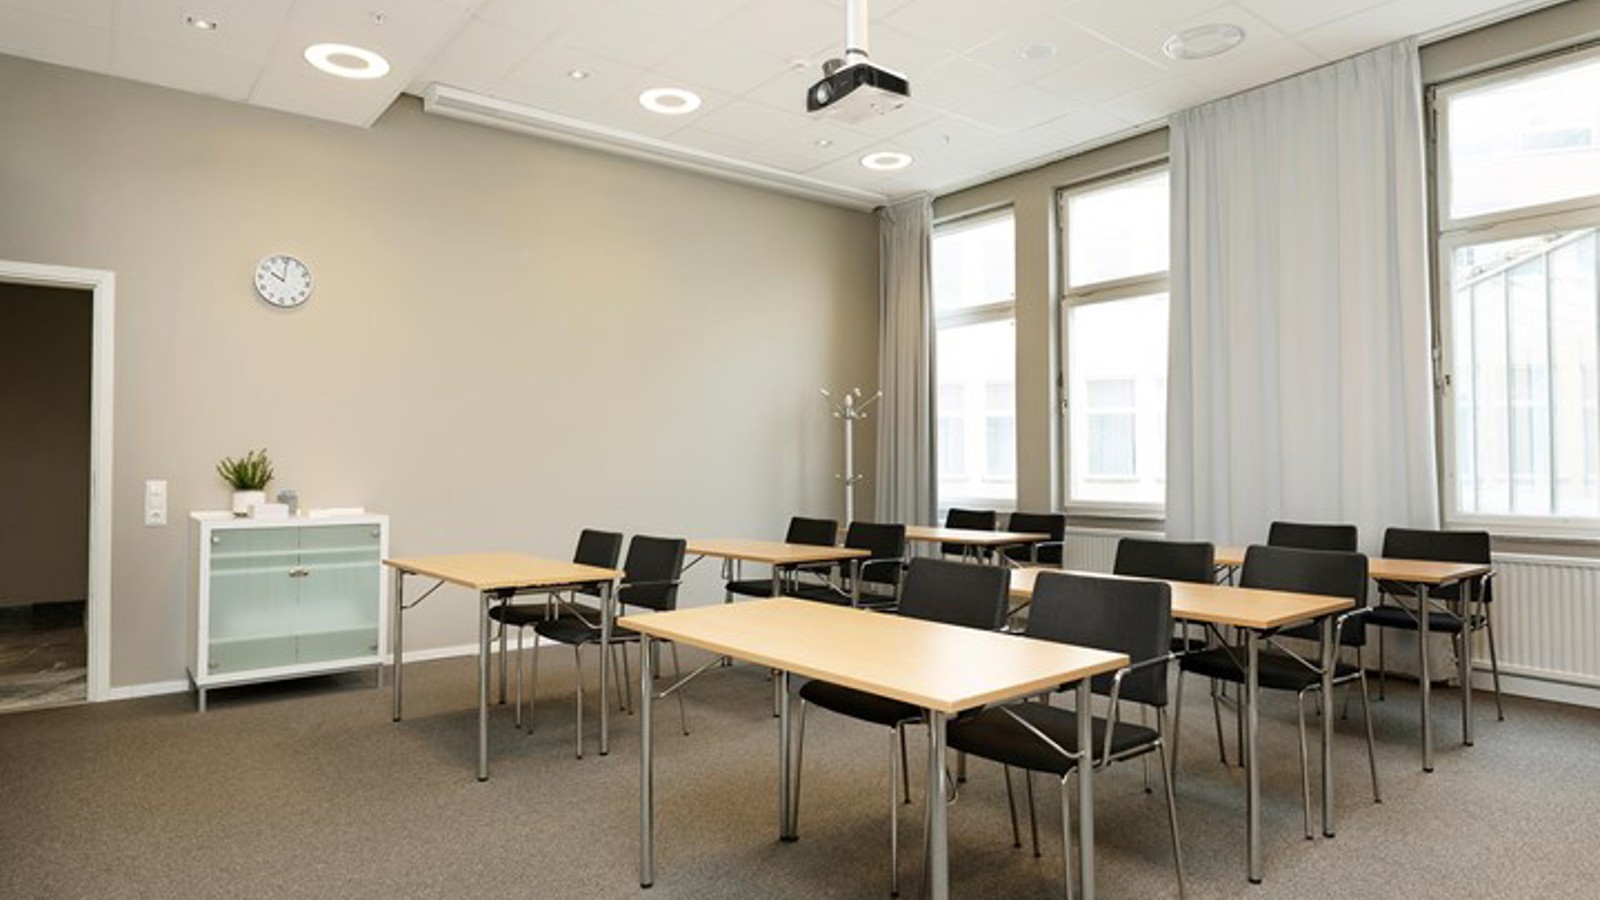 Conference room with school seating, large windows, brown carpet, wooden table